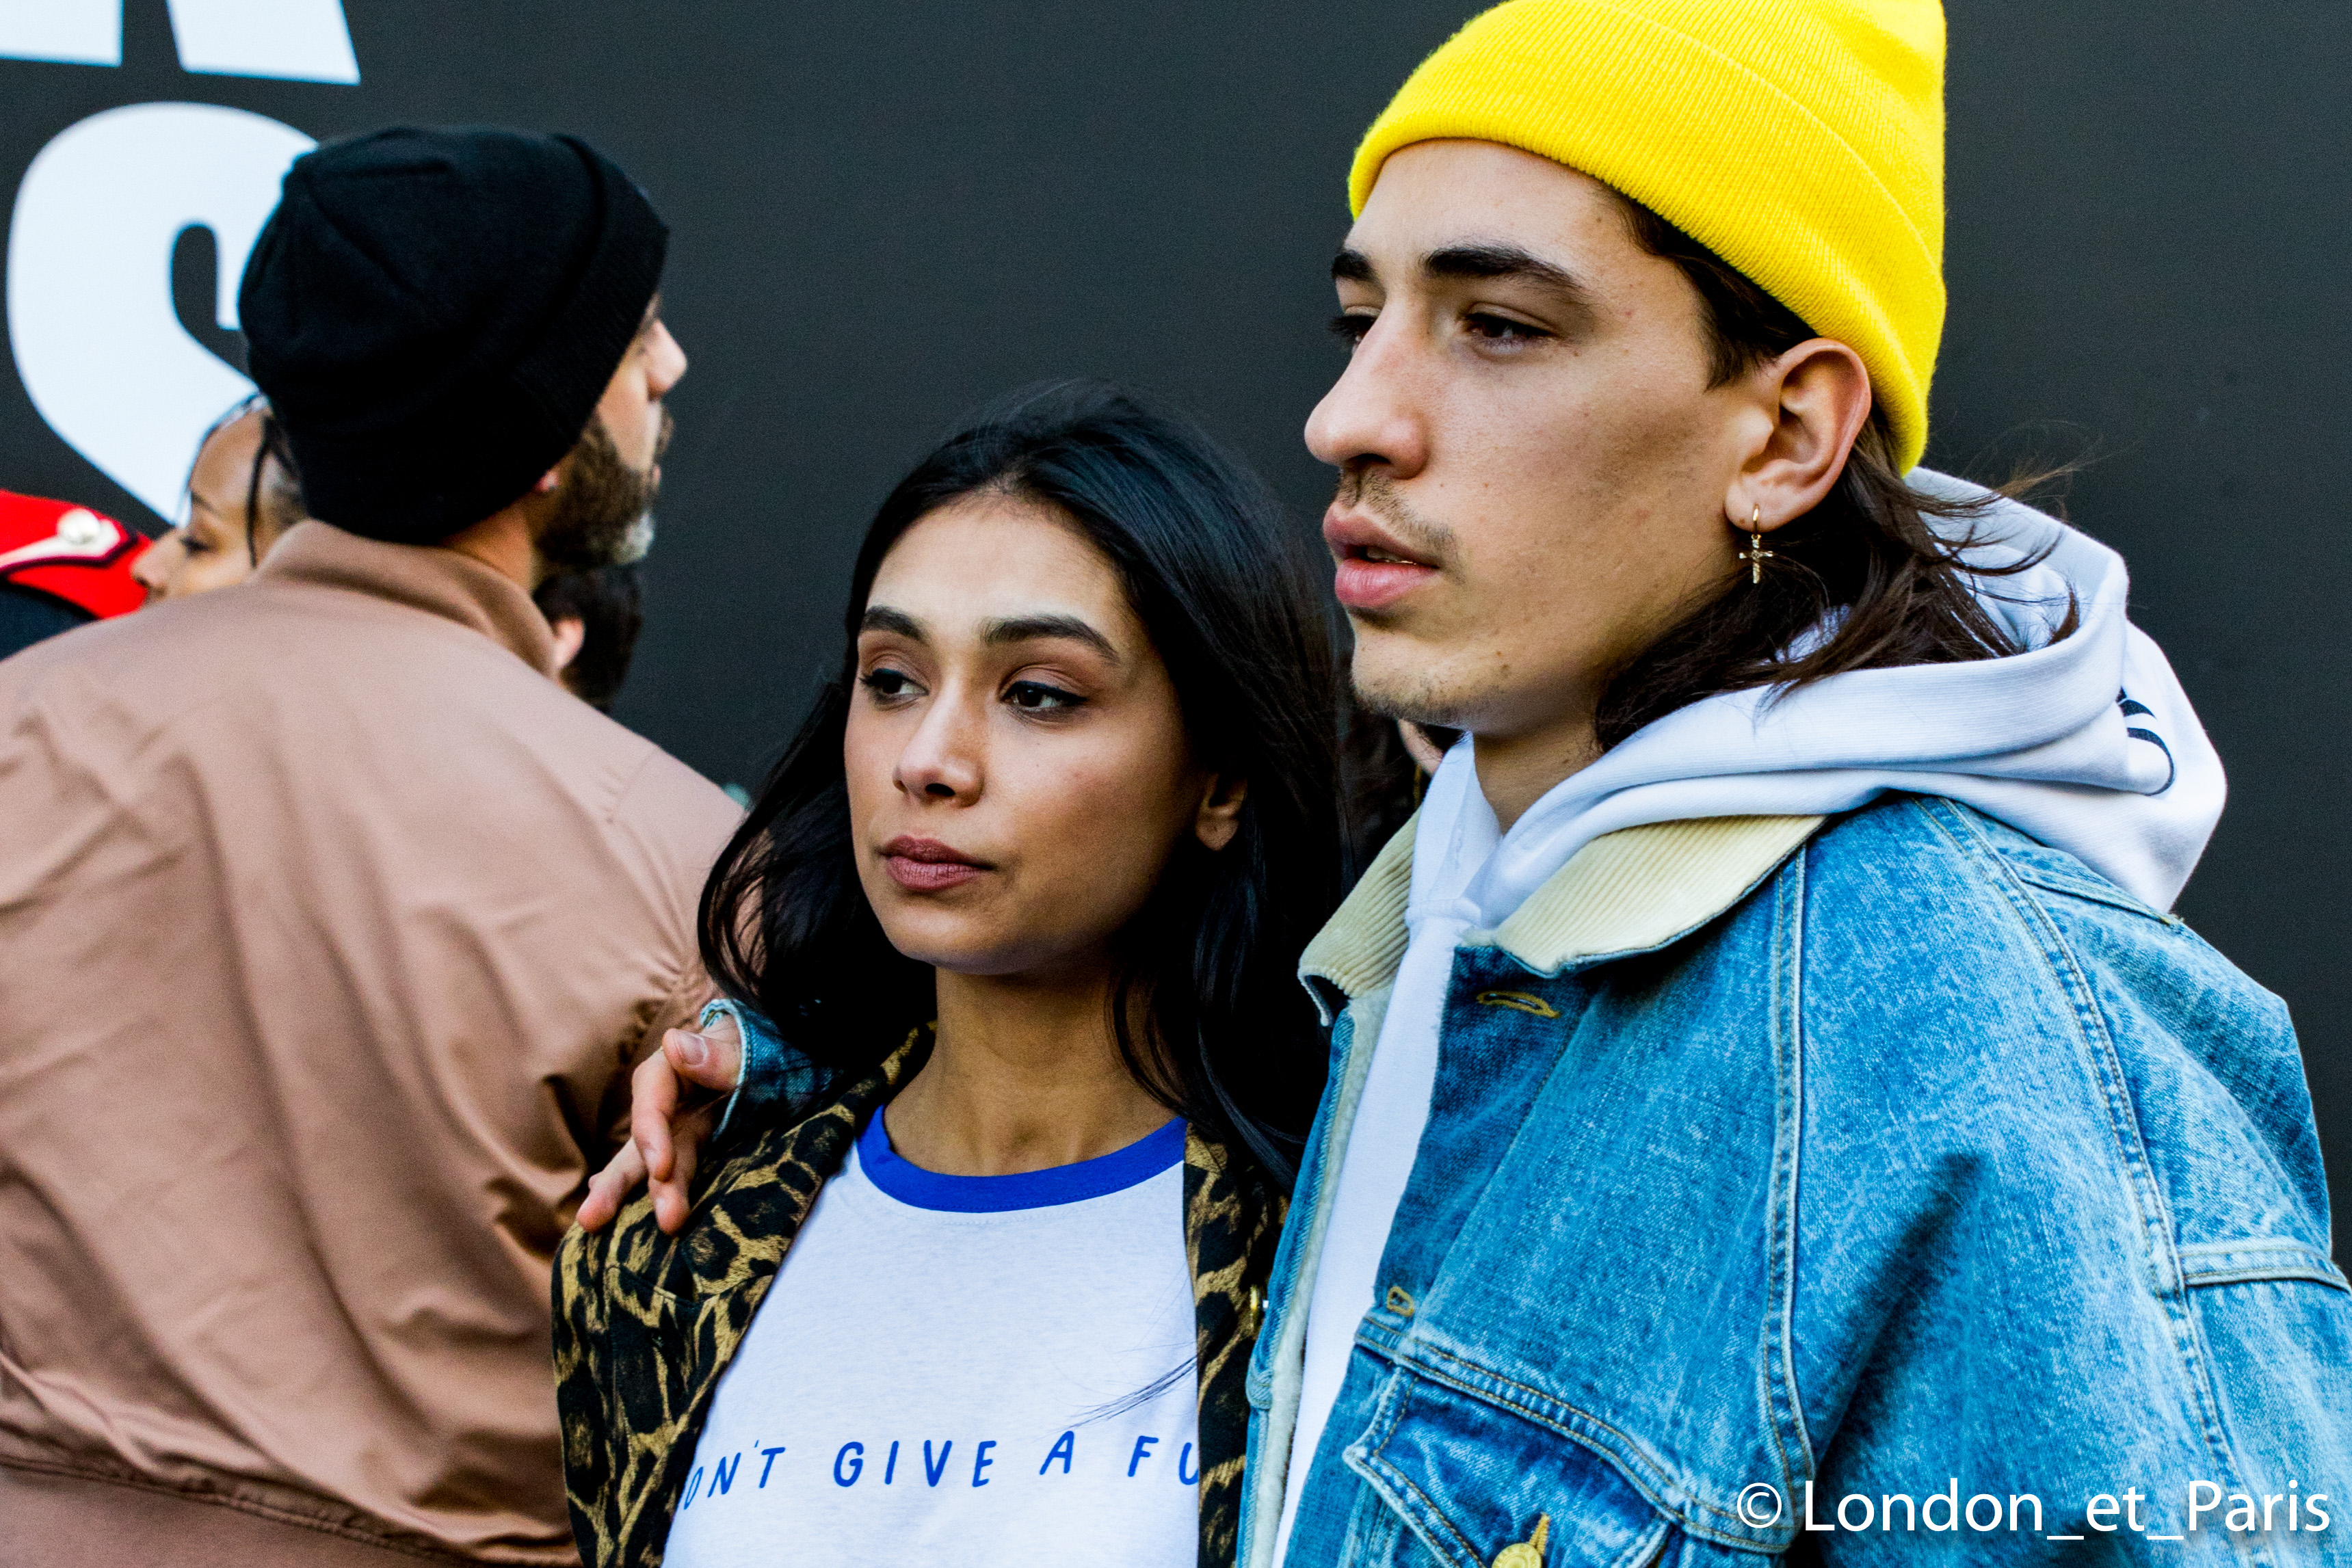 Hector Bellerin And Shree Patel Street Style At London Fashion Week Men's FW18